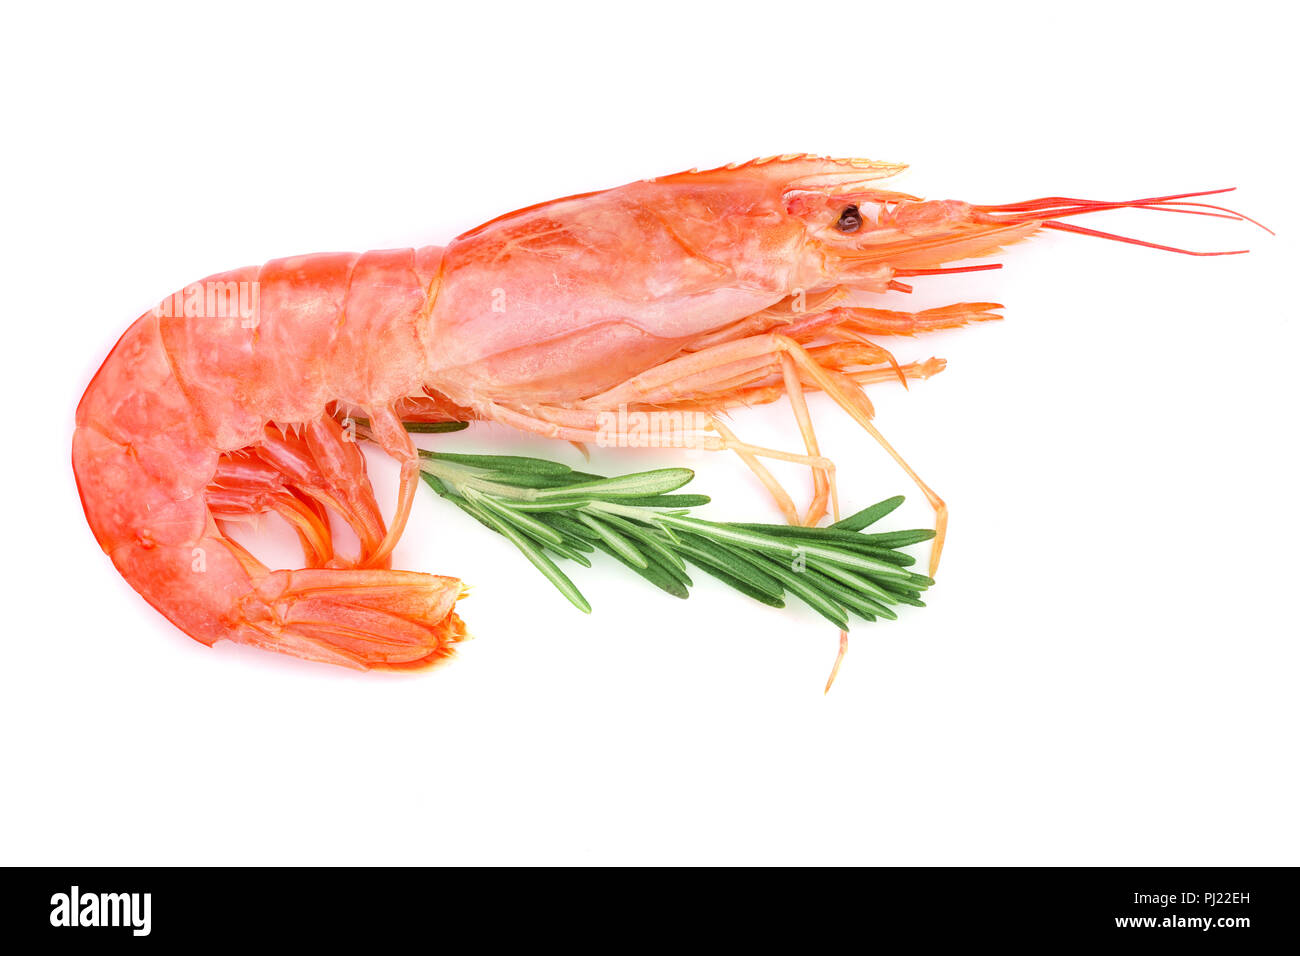 Red cooked prawn or shrimp with rosemary isolated on white background. Top view. Stock Photo